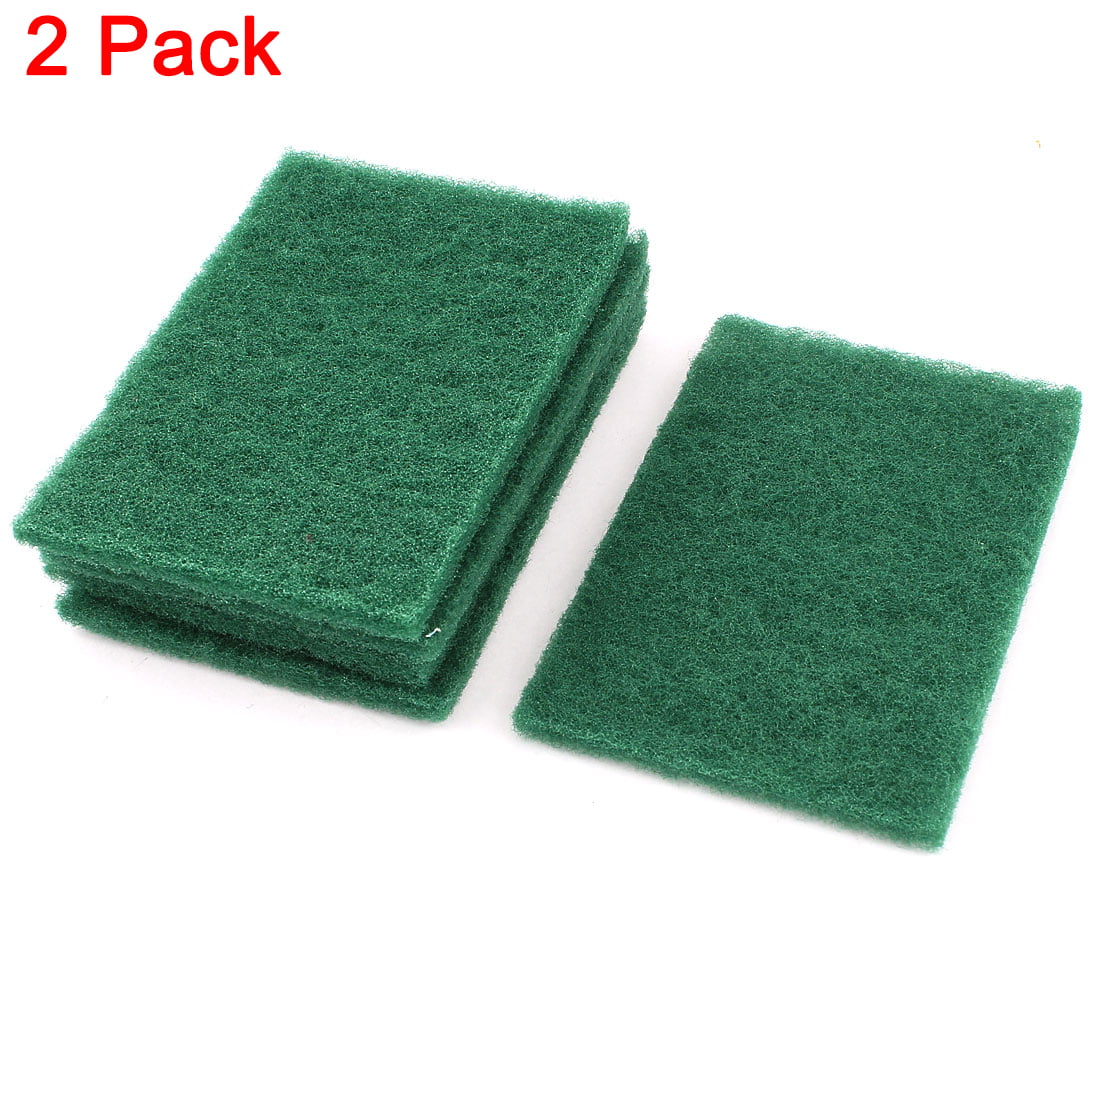 6PC Sponge Cleaning Dish Washing Catering Scouring Pads Kitchen Cleaning US sell 